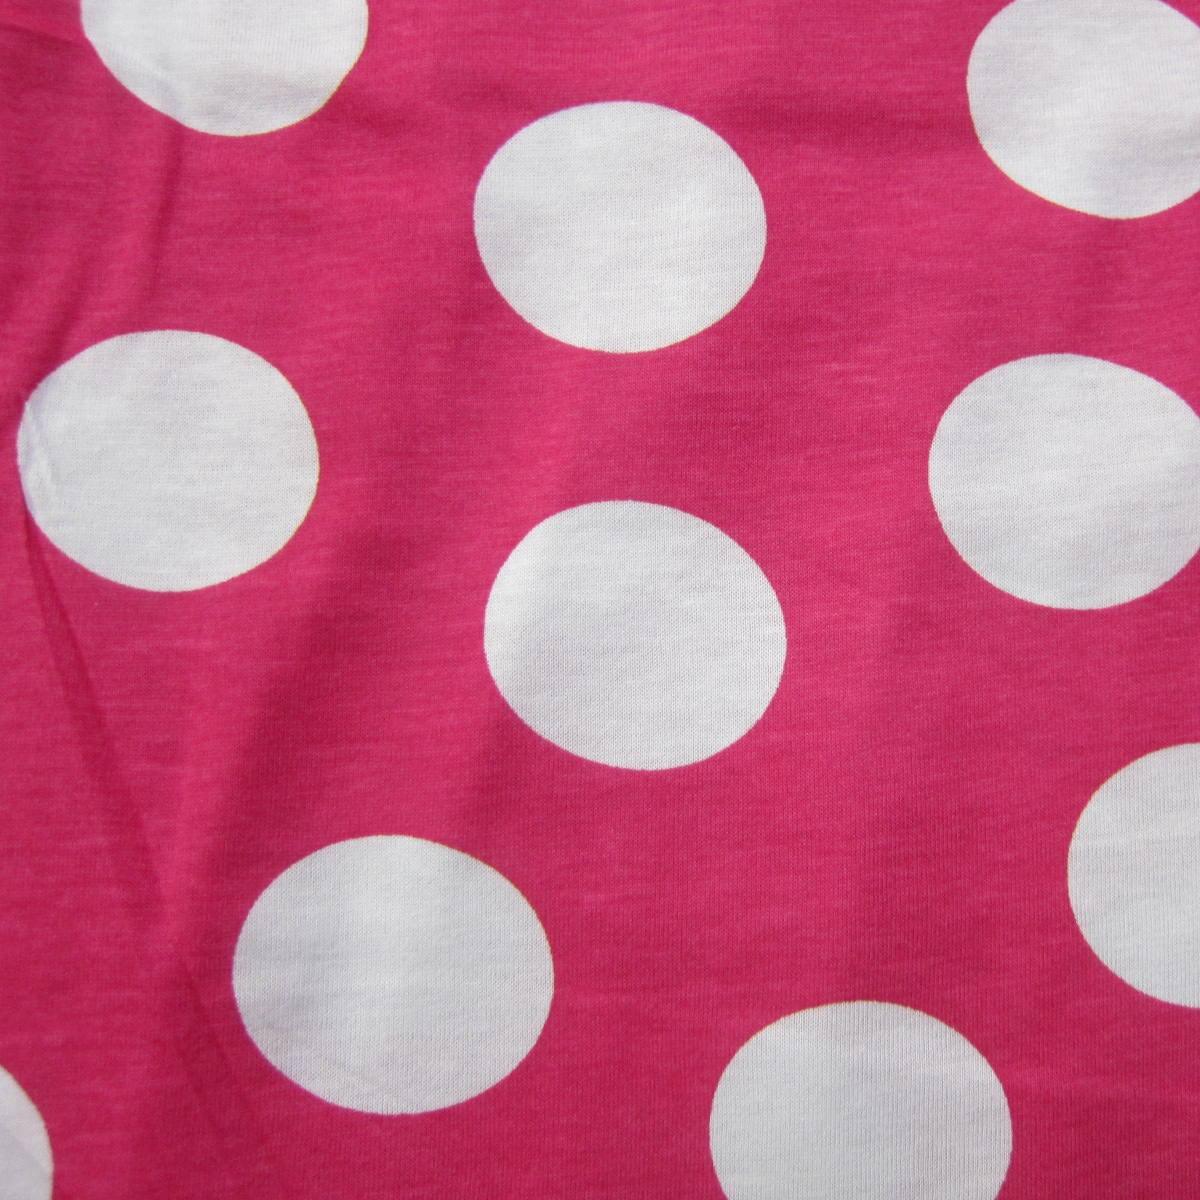 White 1 3/4" Dots on Hot Pink Cotton Jersey 